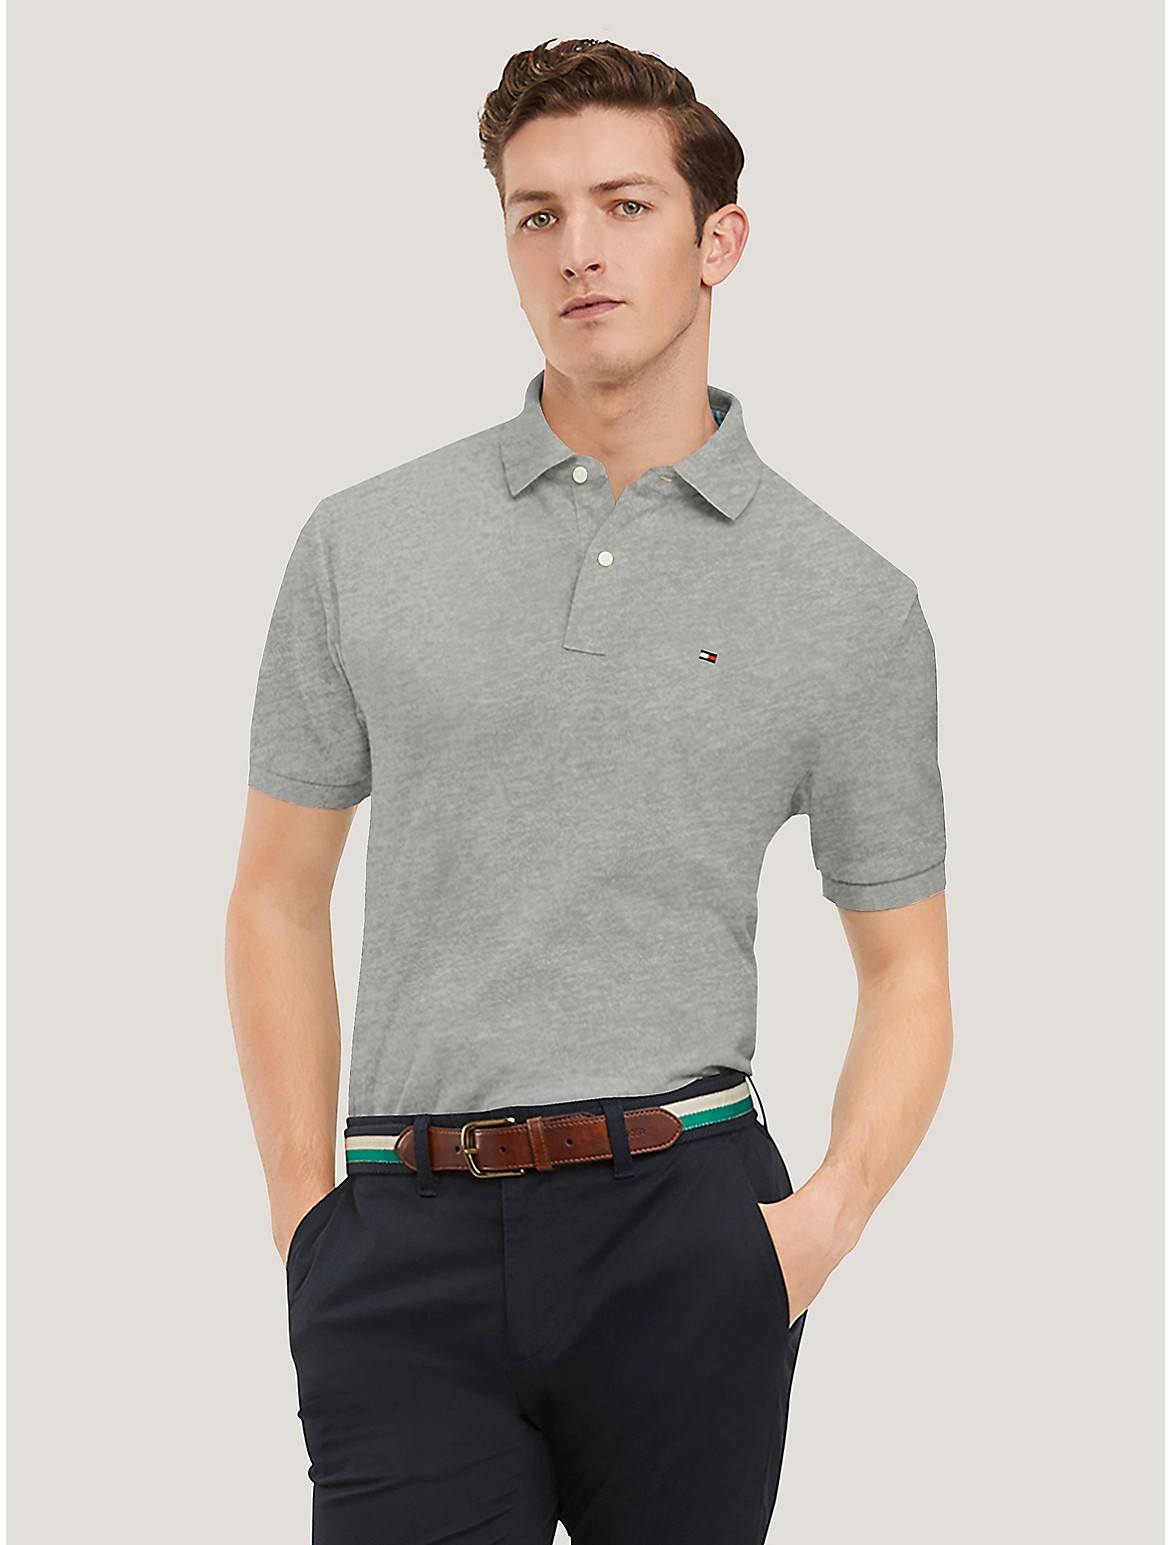 Tommy Hilfiger Classic Fit Pique Polo In Grey Heather